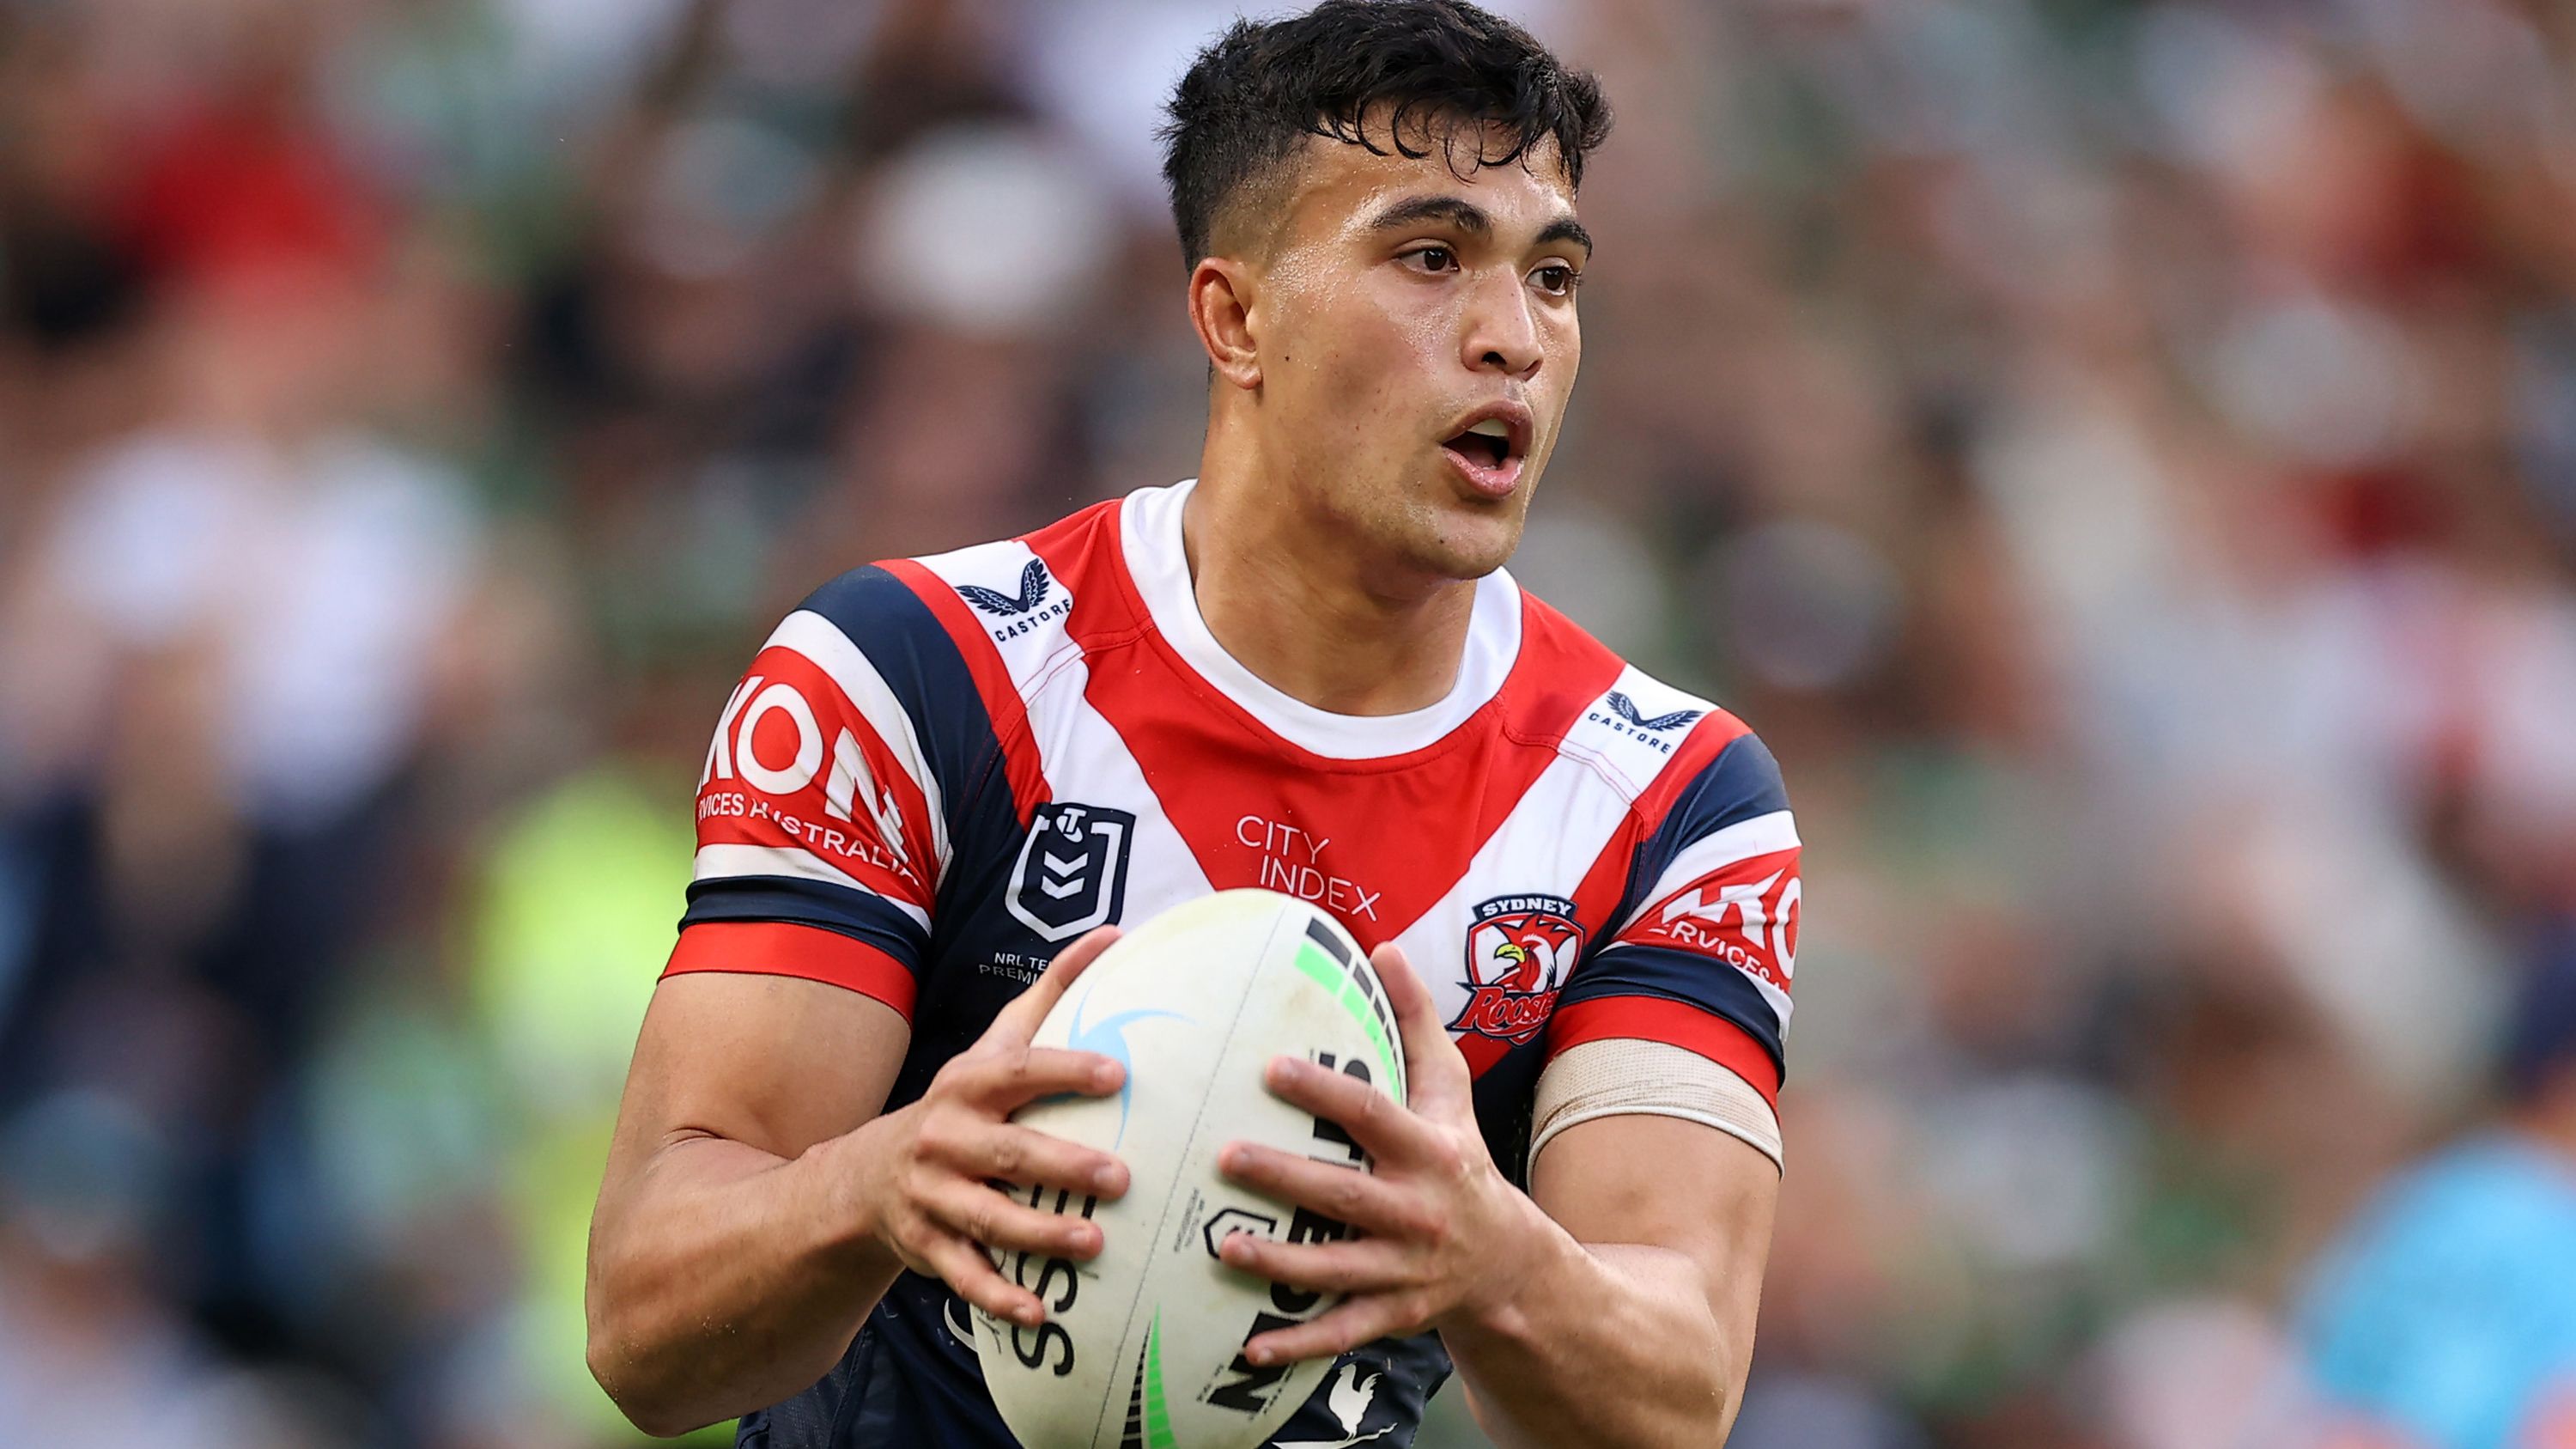 SYDNEY, AUSTRALIA - SEPTEMBER 11: Joseph Suaalii of the Roosters runs the ball during the NRL Elimination Final match between the Sydney Roosters and the South Sydney Rabbitohs at Allianz Stadium on September 11, 2022 in Sydney, Australia. (Photo by Mark Kolbe/Getty Images)